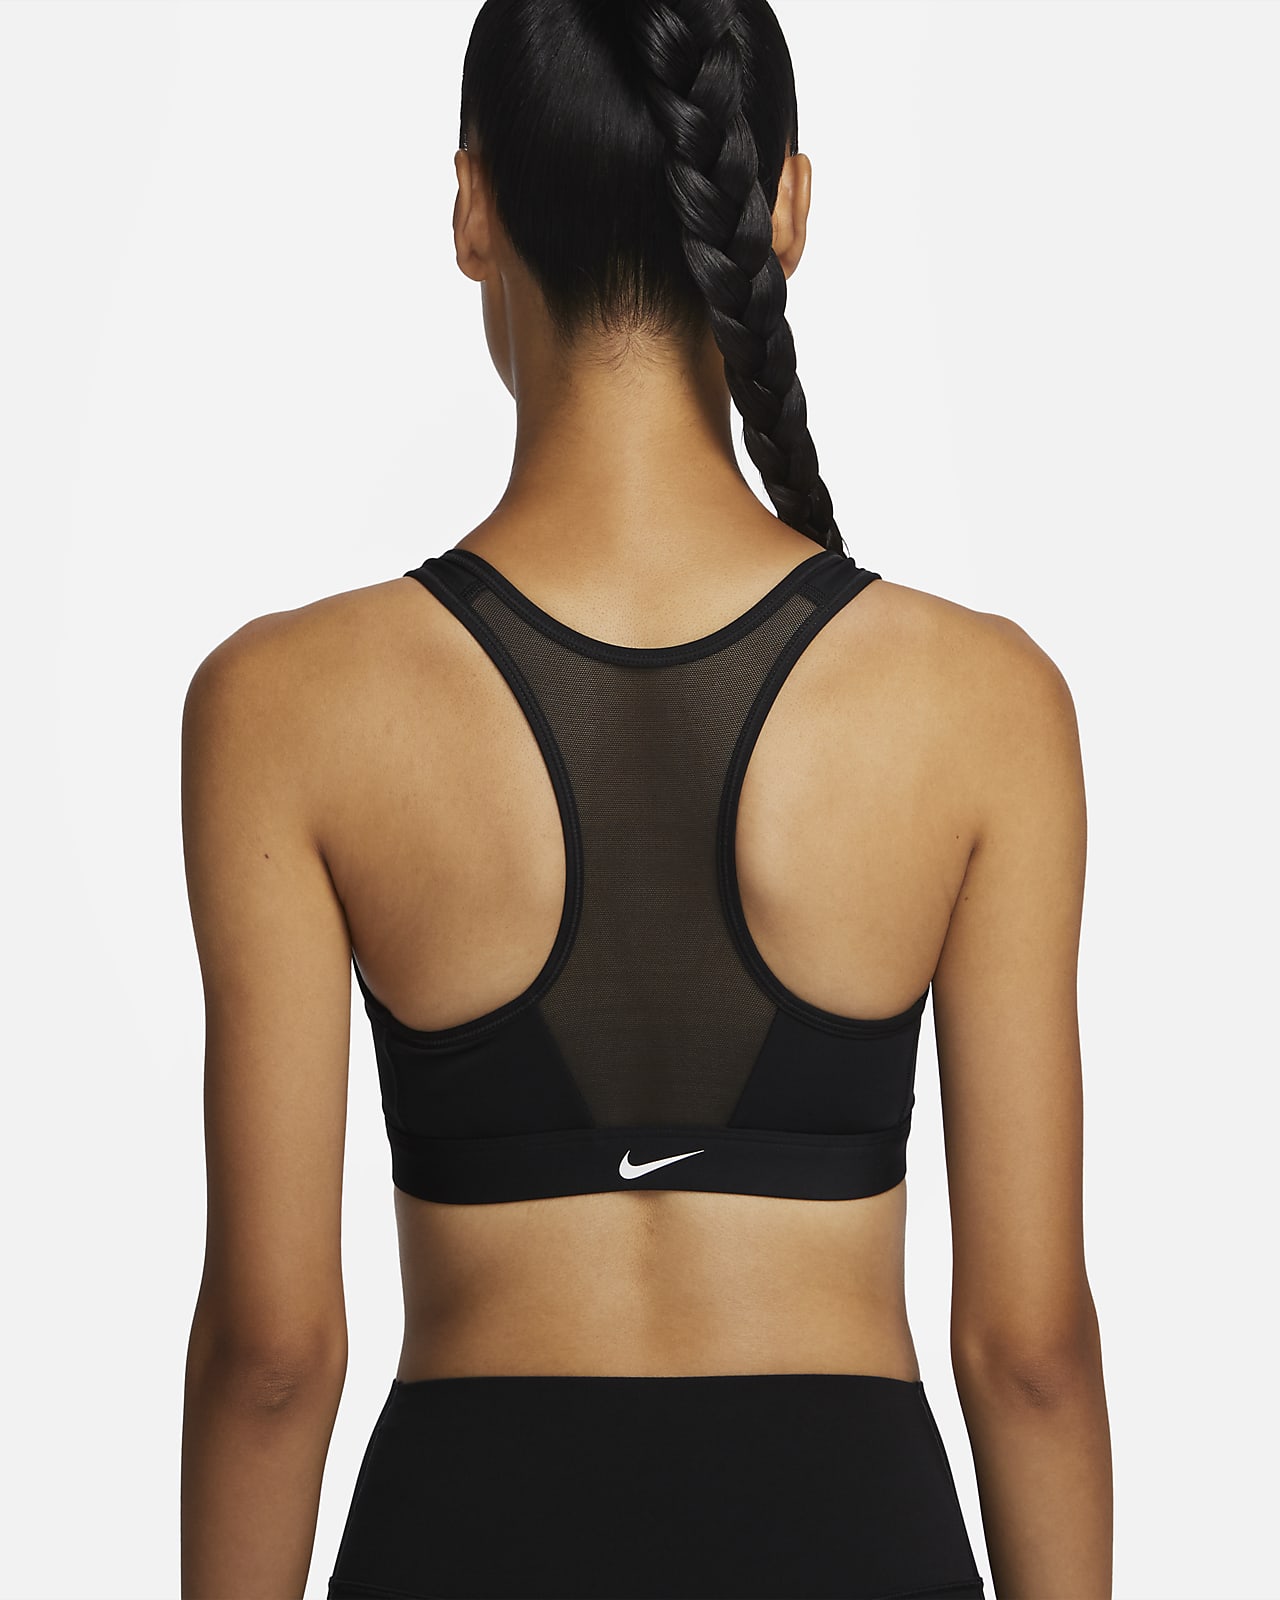 https://static.nike.com/a/images/t_PDP_1280_v1/f_auto,q_auto:eco/4ac16aea-0aff-432e-86e9-3d34dd5ee17b/swoosh-support-padded-zip-front-sports-bra-0jrhrb.png